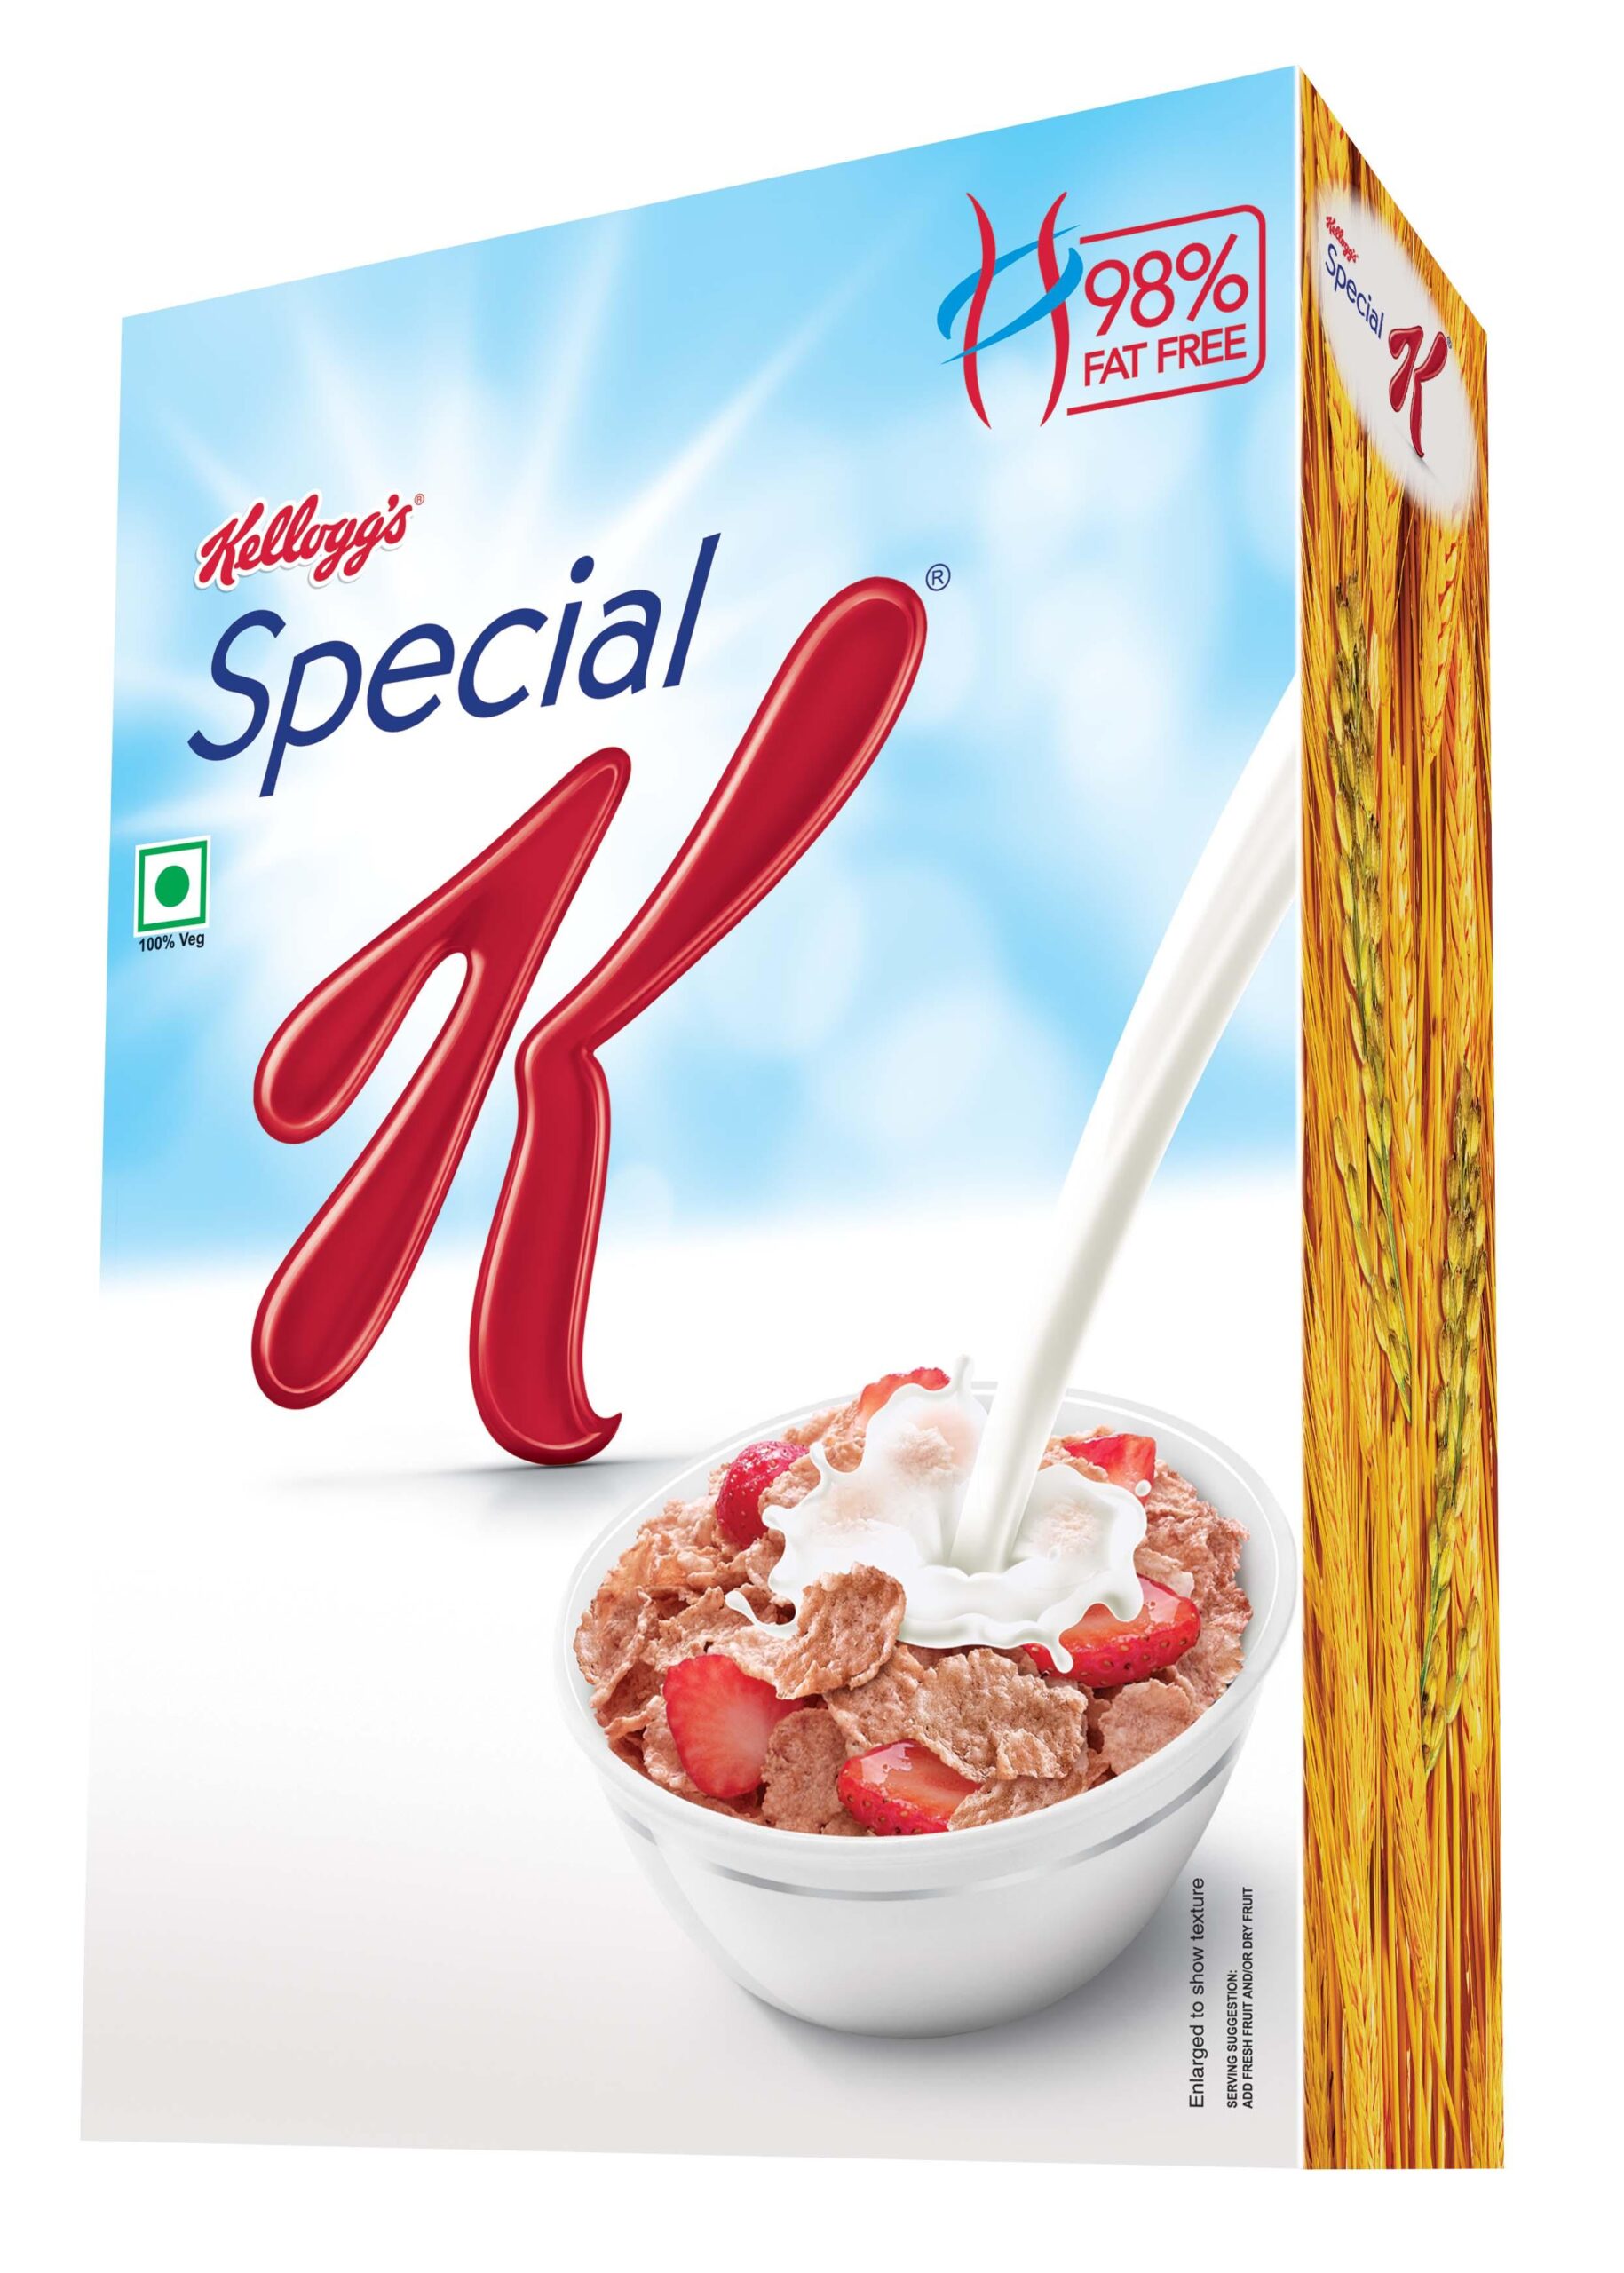 KELLOGG’S SPECIAL K Photos, Wallpaper and Wallpapers